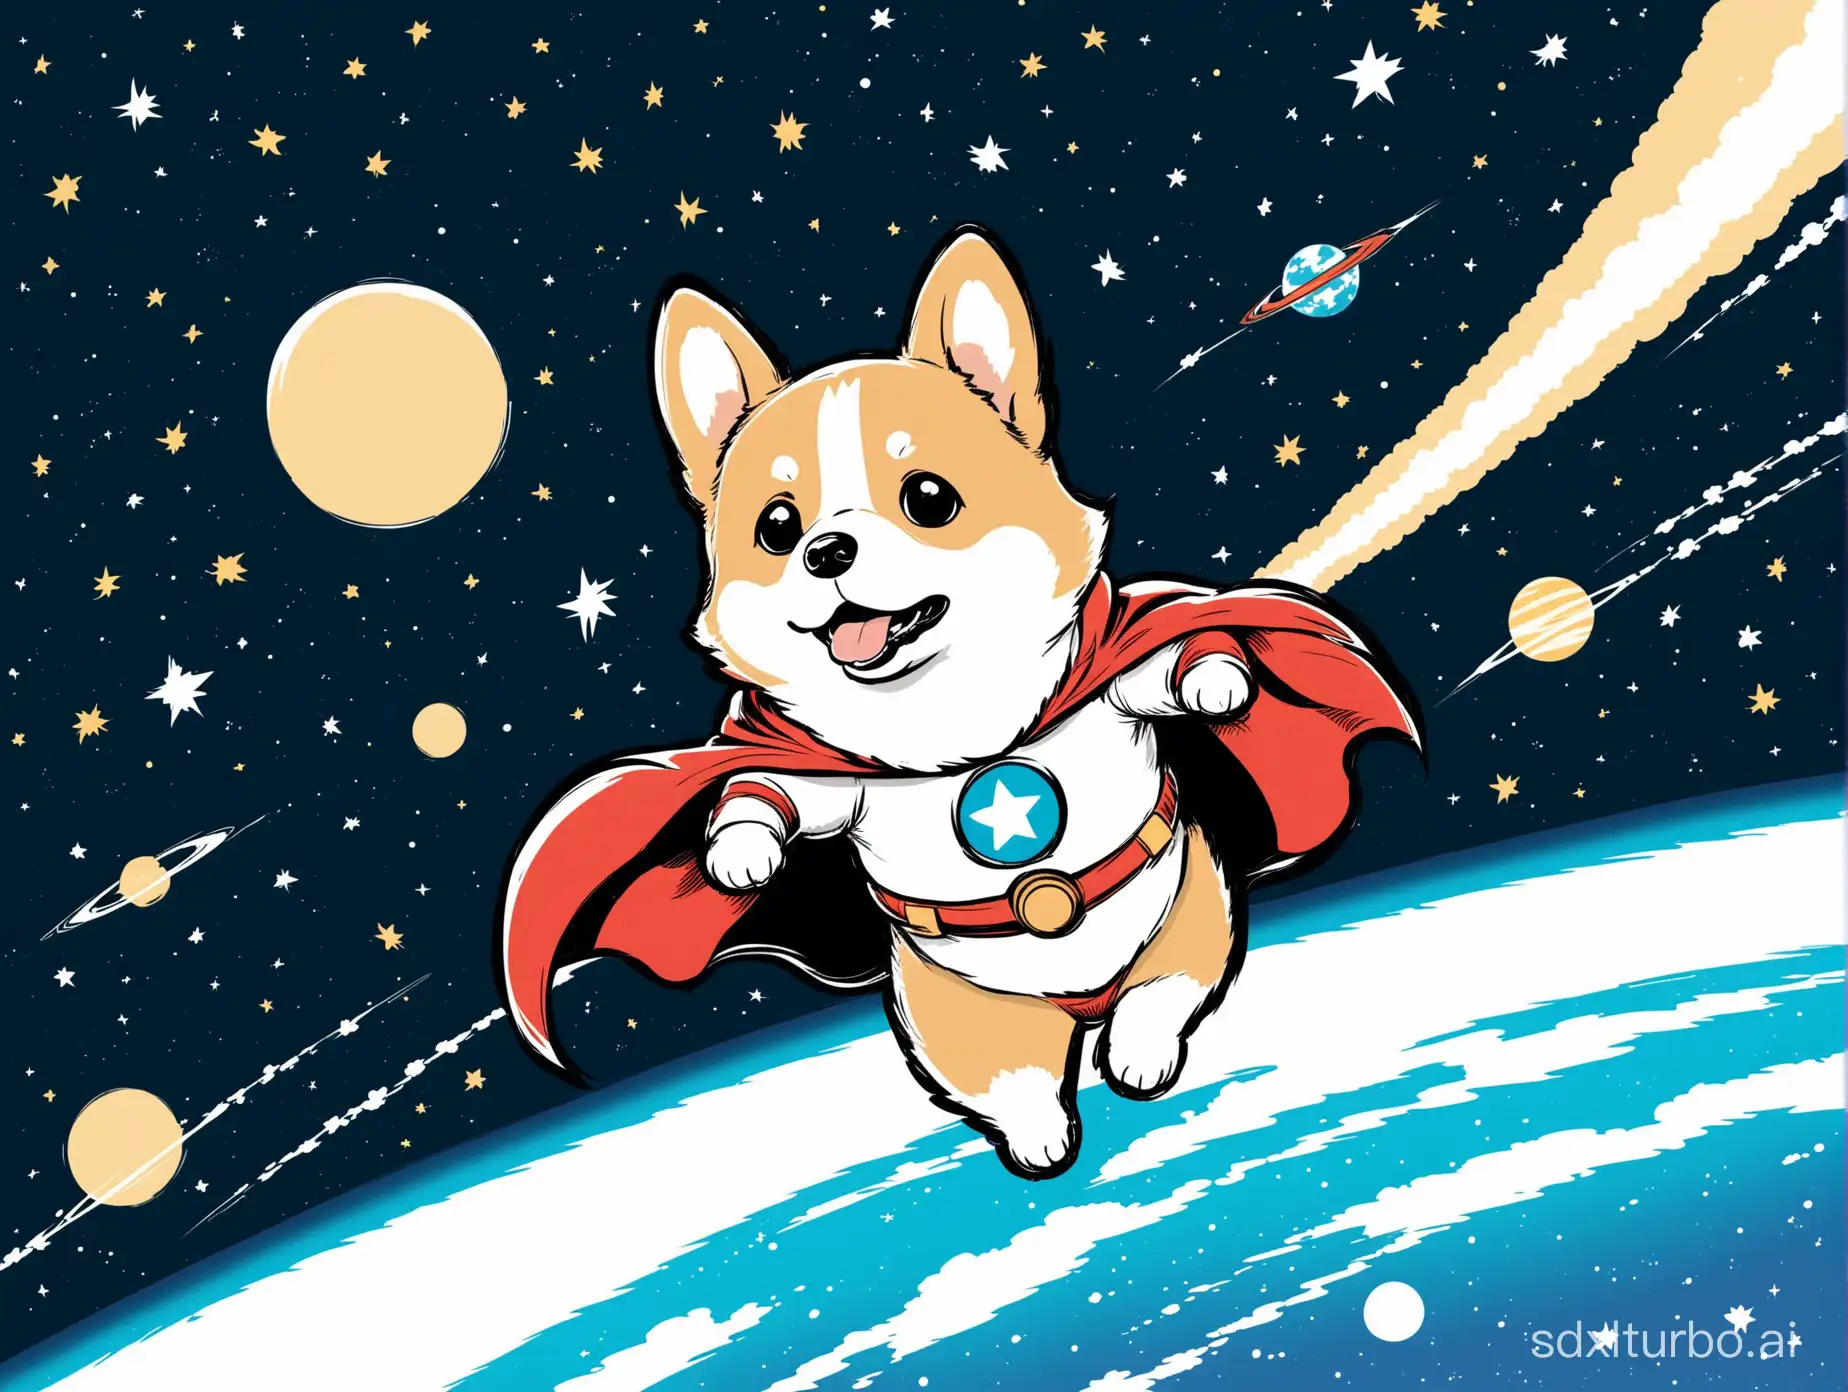 A Corgi superhero patrols in space to safeguard the security of the universe. Minimalist Japanese manga style, simple drawing style.